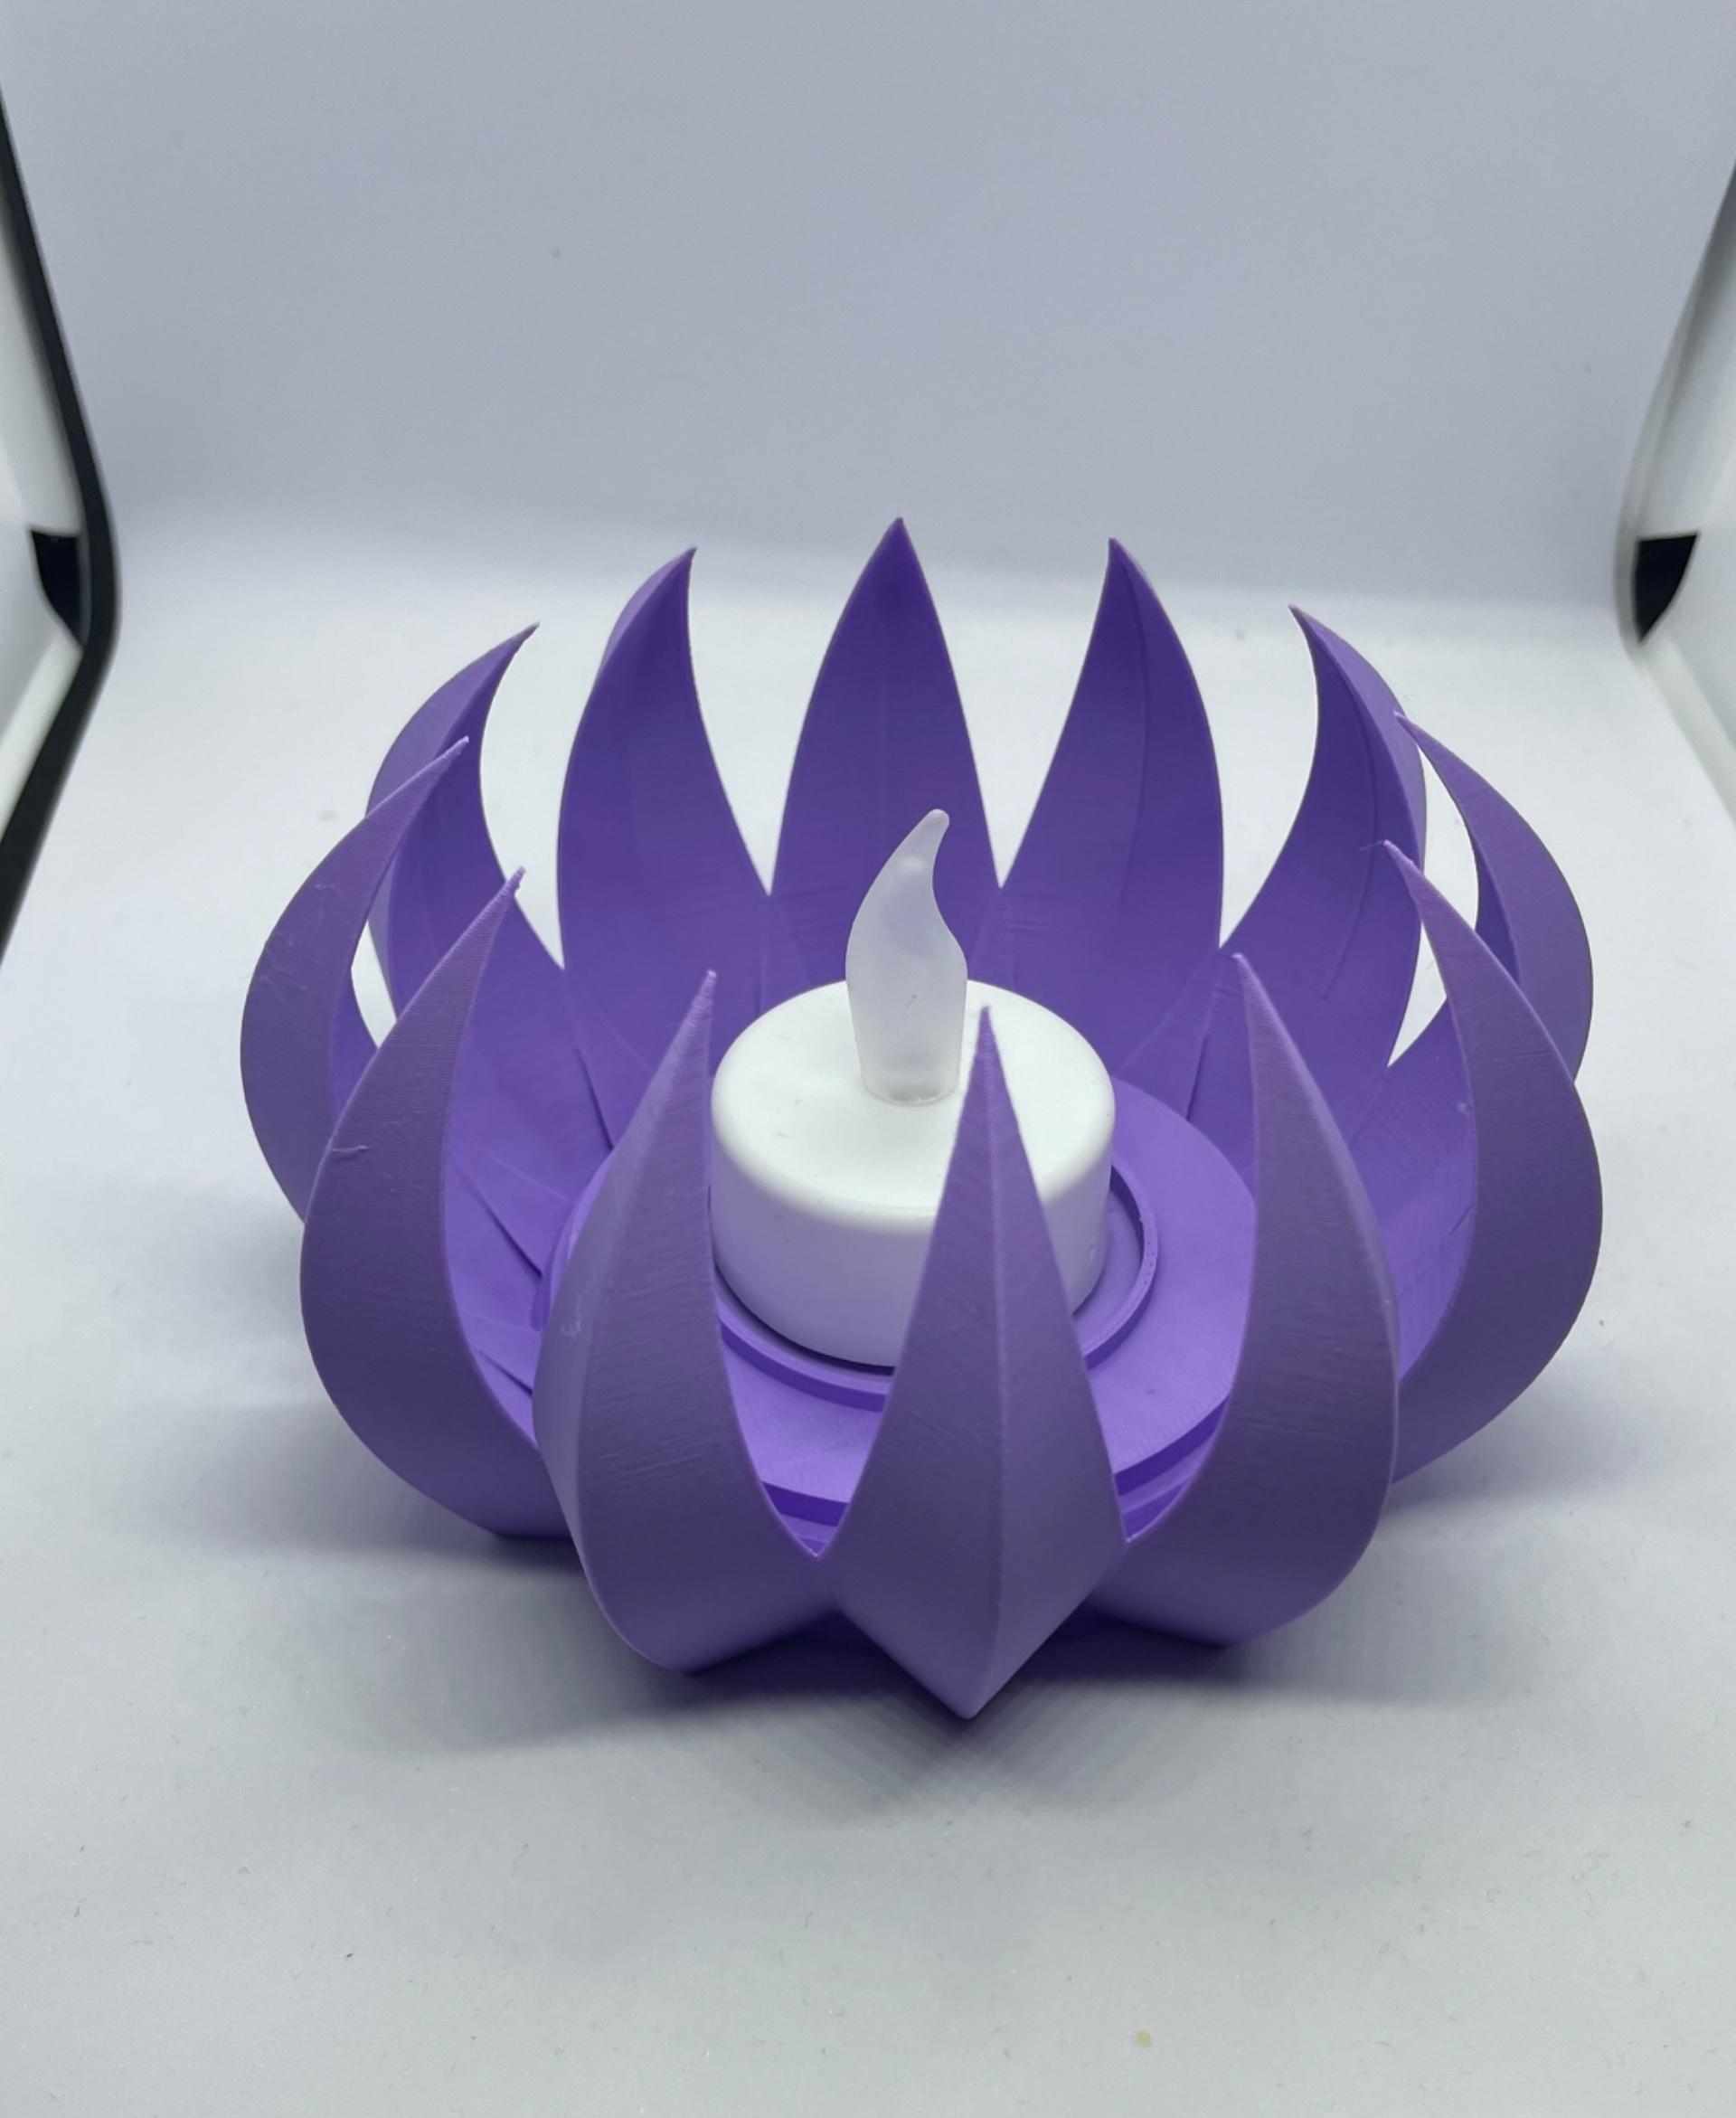 The Yaro Tealight Candle Holder | Modern Home Decor 3d model